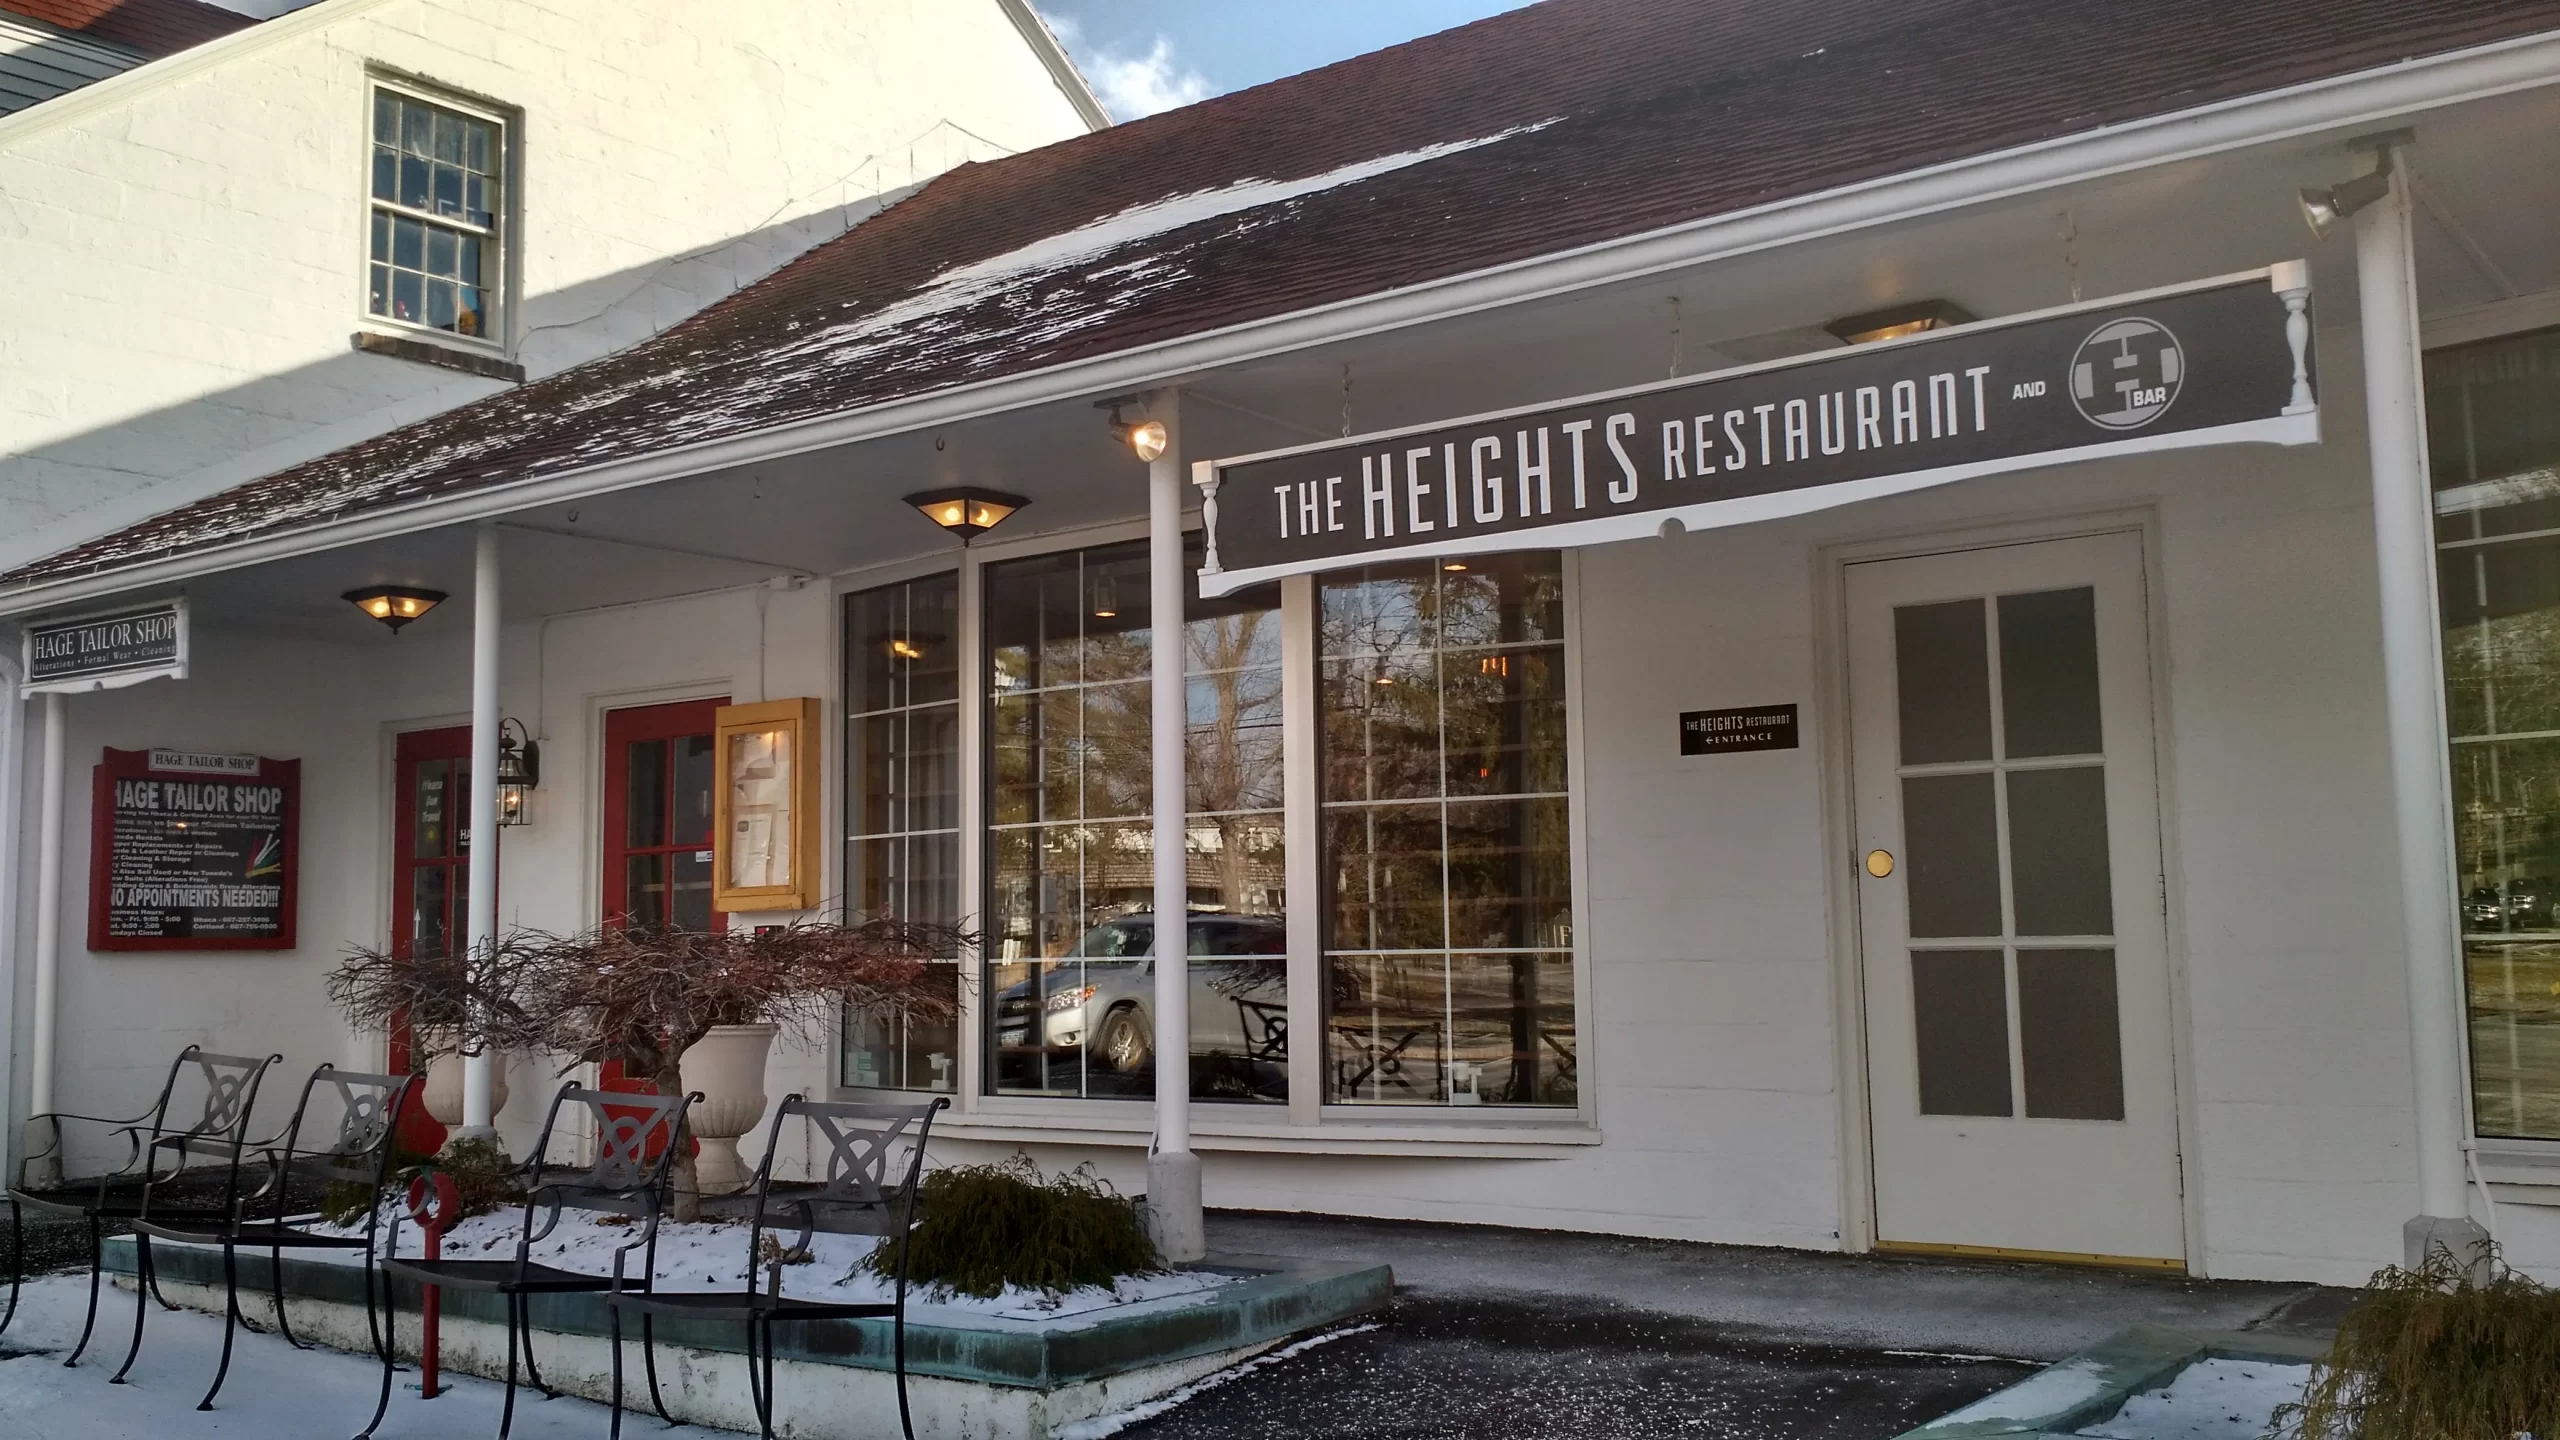 The Heights Restaurant